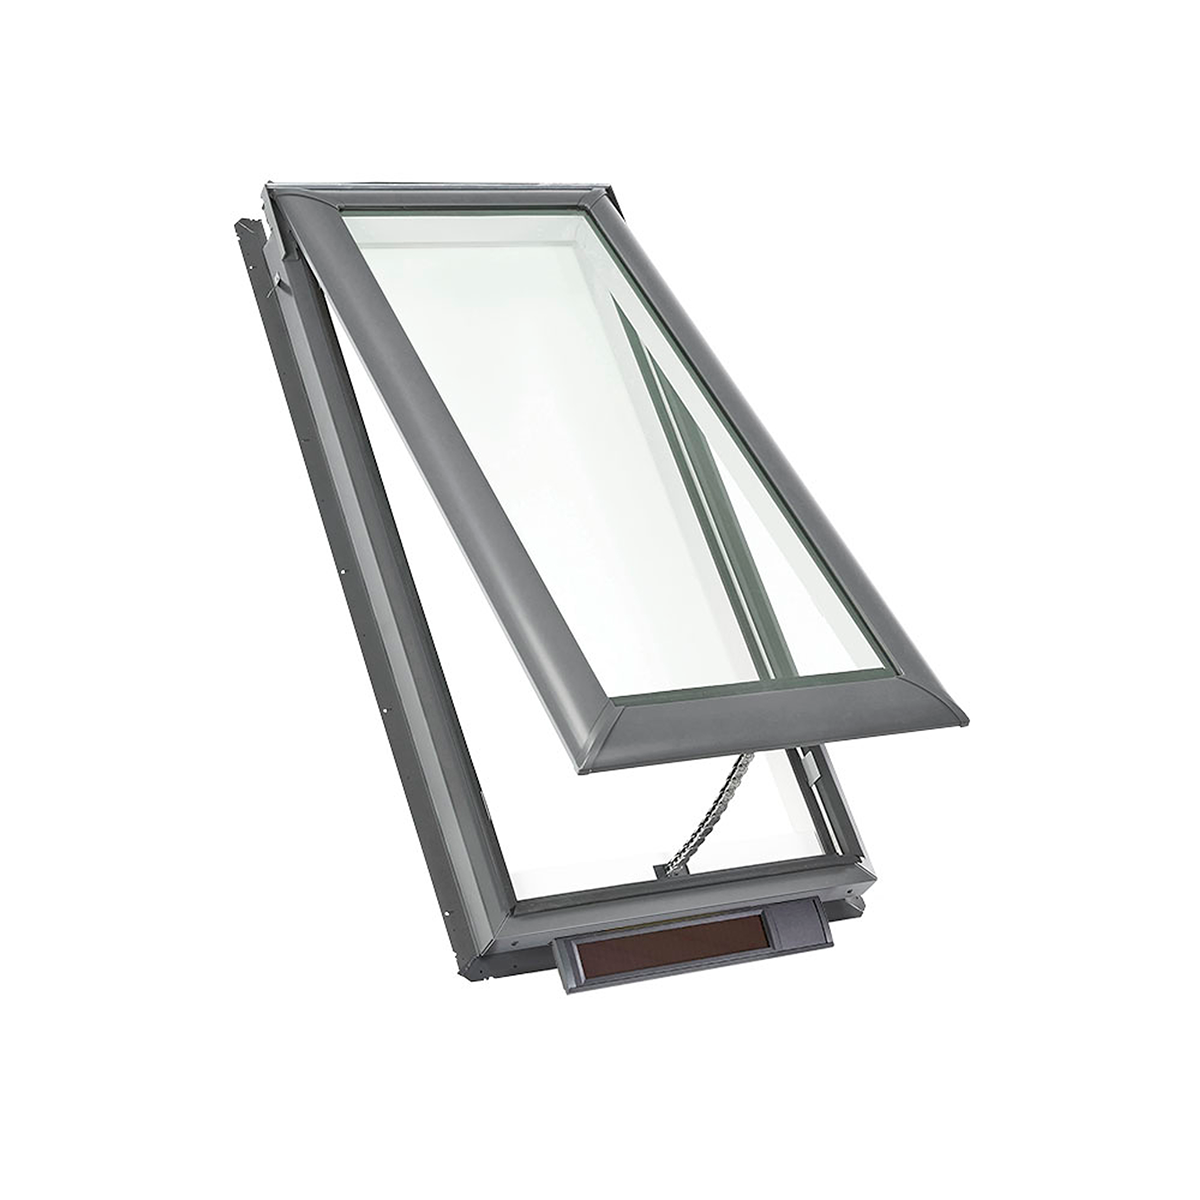 Solar Powered Deck-Mount Skylight with Laminated Low-E3 Glass - 44-1/4 in. x 26-7/8 in. - VSS S01